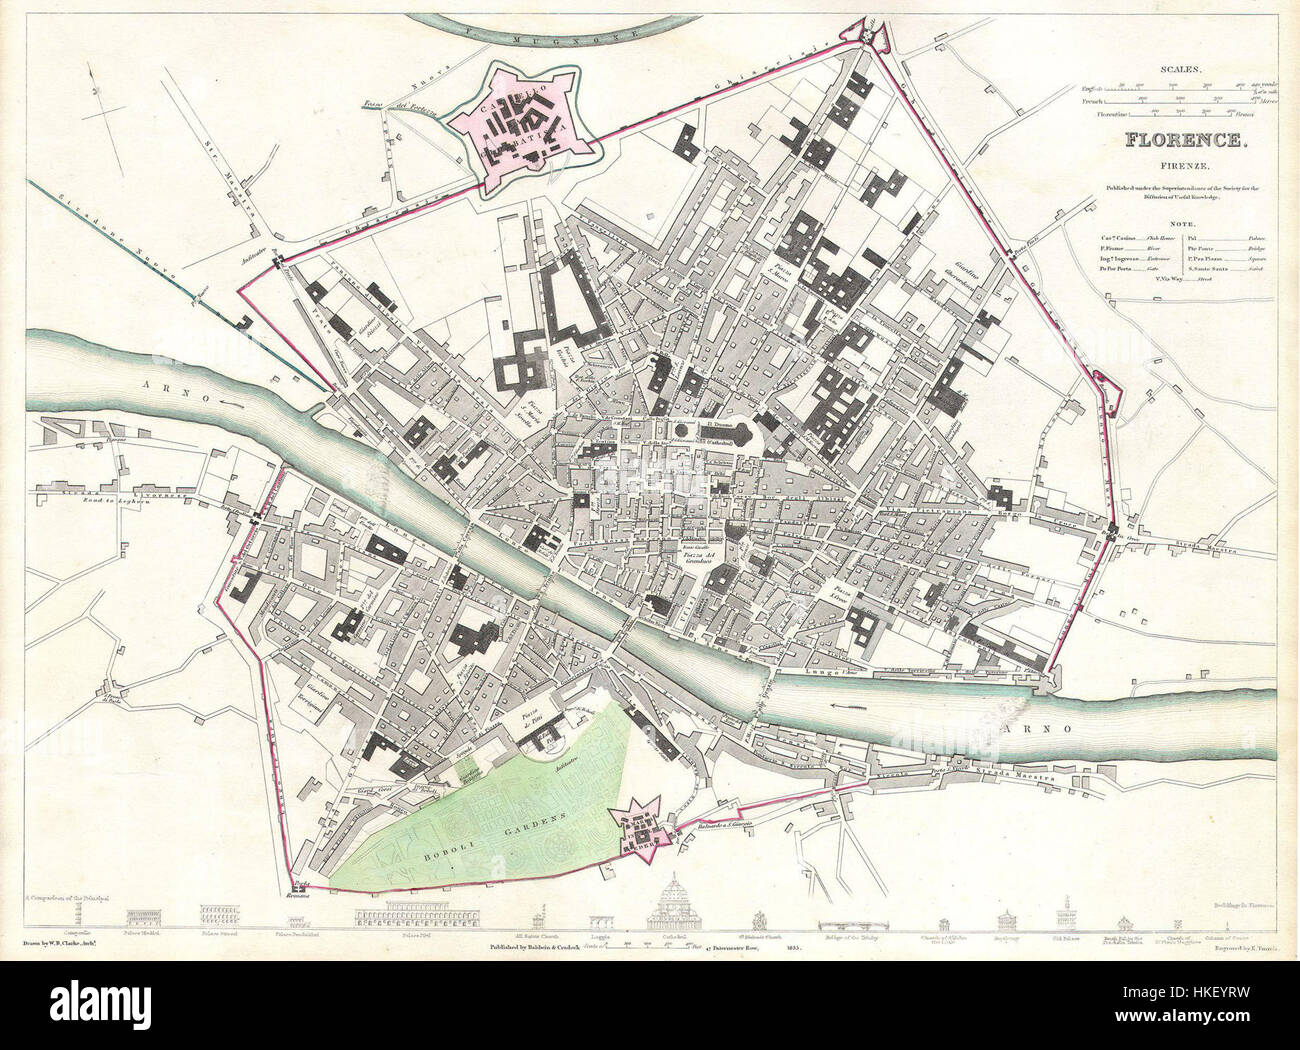 1835 S.D.U.K. Plan de la ville ou d'un Plan de Florence ou Firenze, Italie Florence 1835 SDUK Geographicus Banque D'Images